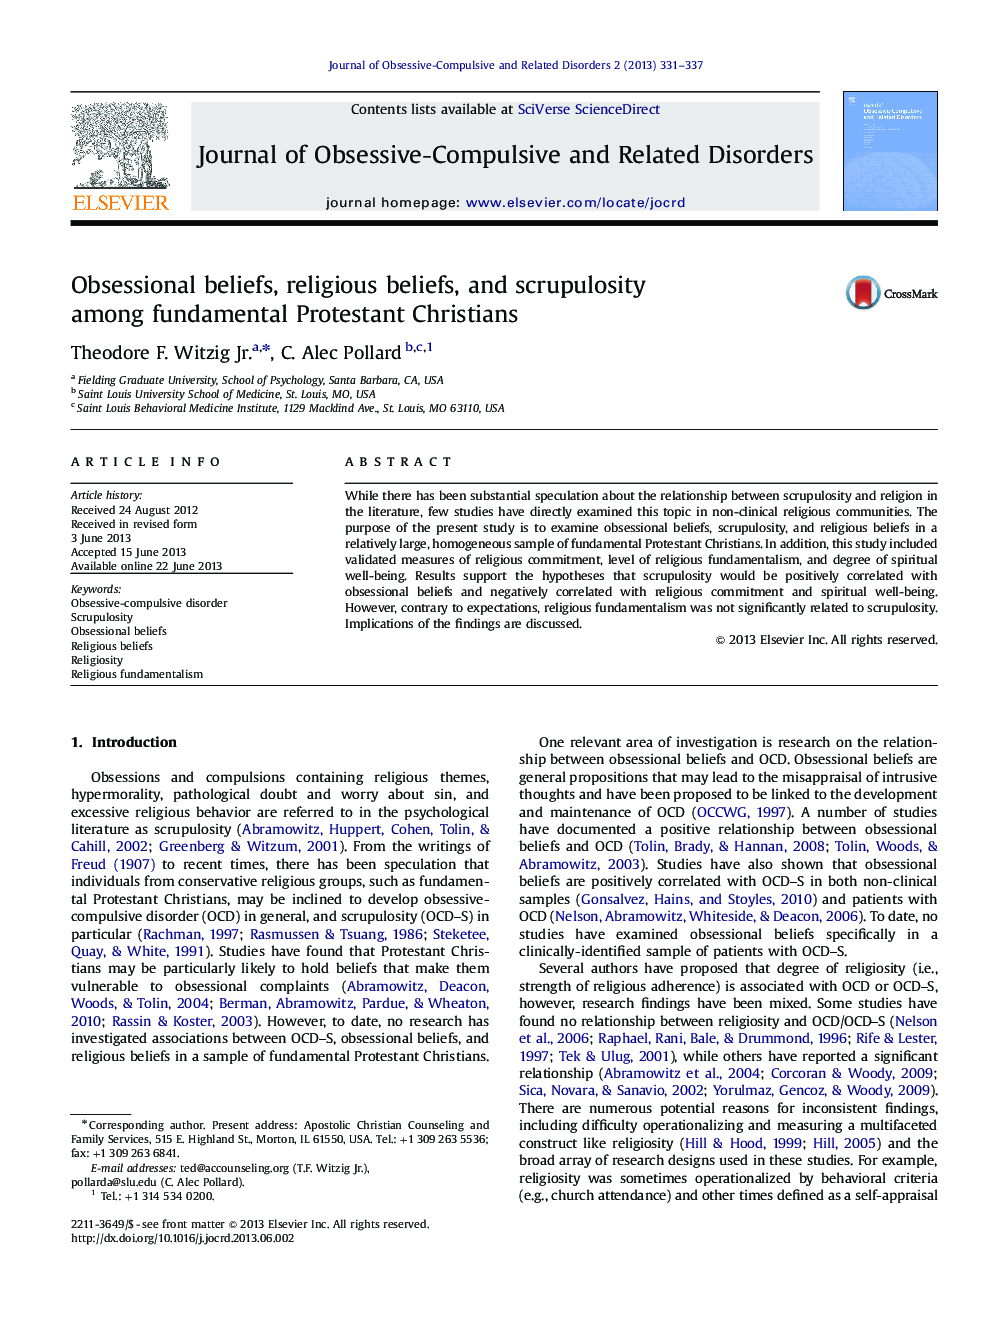 Obsessional beliefs, religious beliefs, and scrupulosity among fundamental Protestant Christians